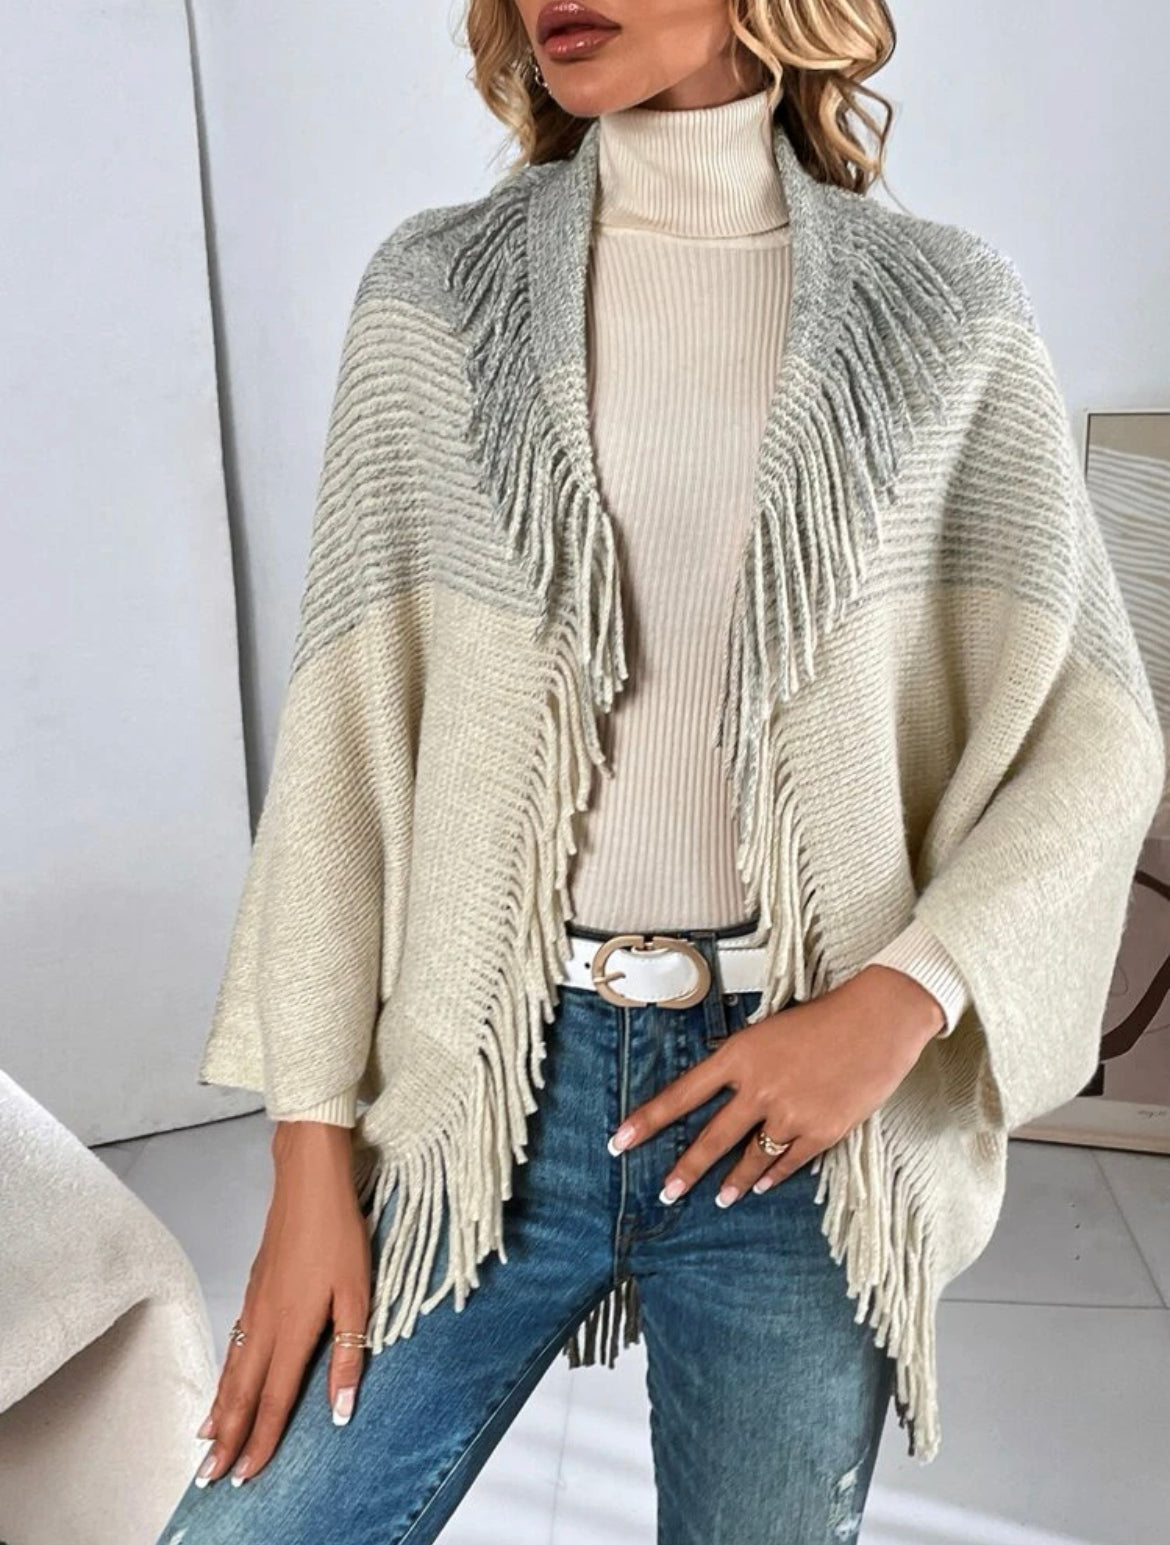 Winter White and Grey Cardigan